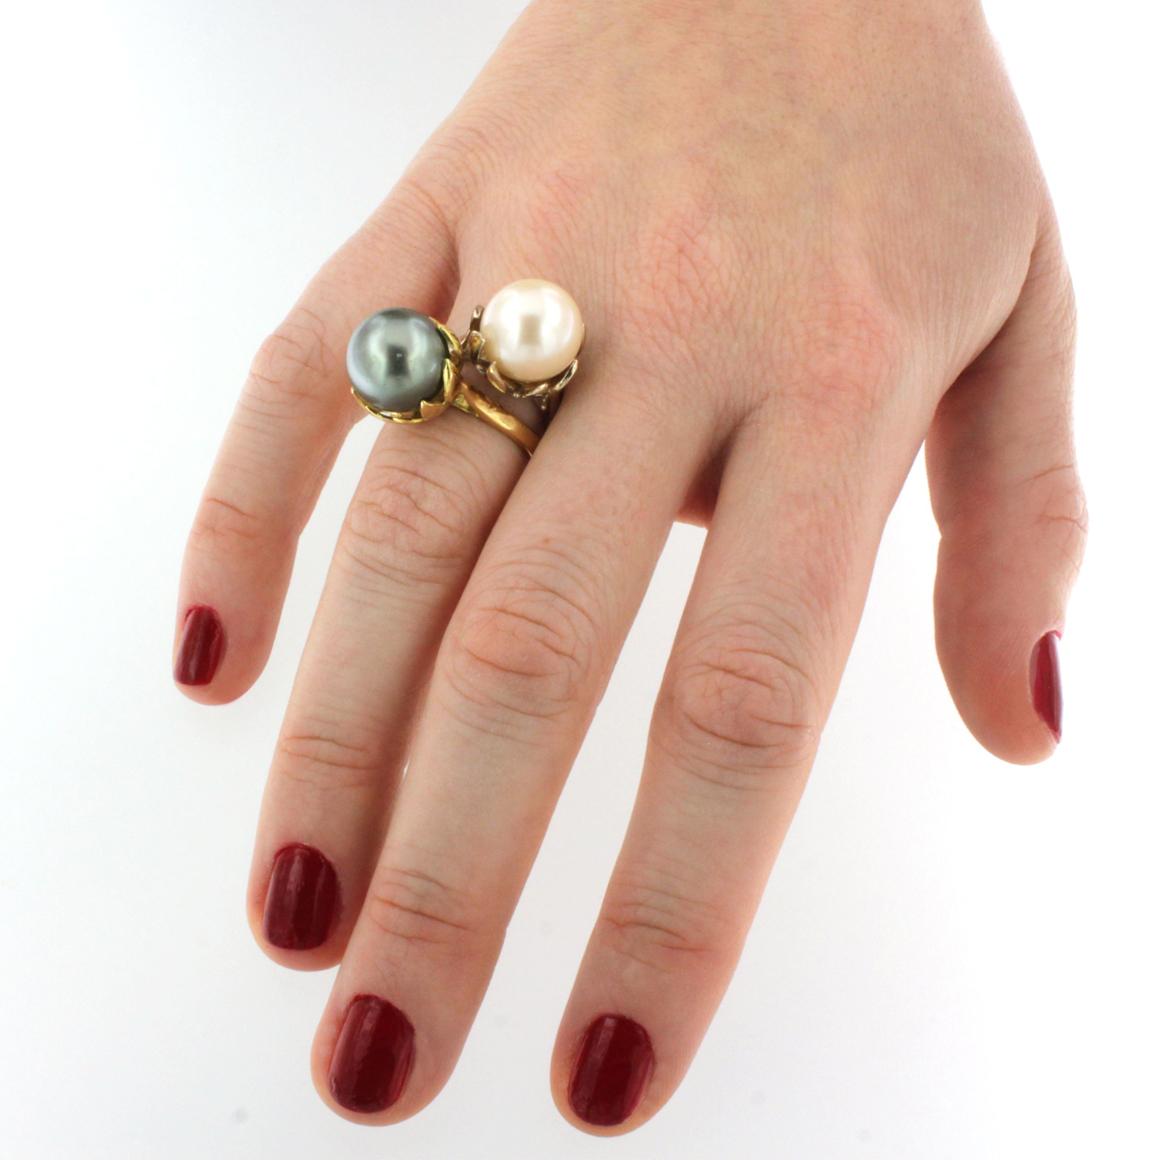 Black and white, beautiful and elegante combination of colours for this timeless ring handmade in Italy by Stanoppi Jewellery since 1948.
Ring in 18k white and yellow gold with White Pearl (12 mm) and Tahiti Pearl (12 mm) 

Size of ring:  14 EU -  7